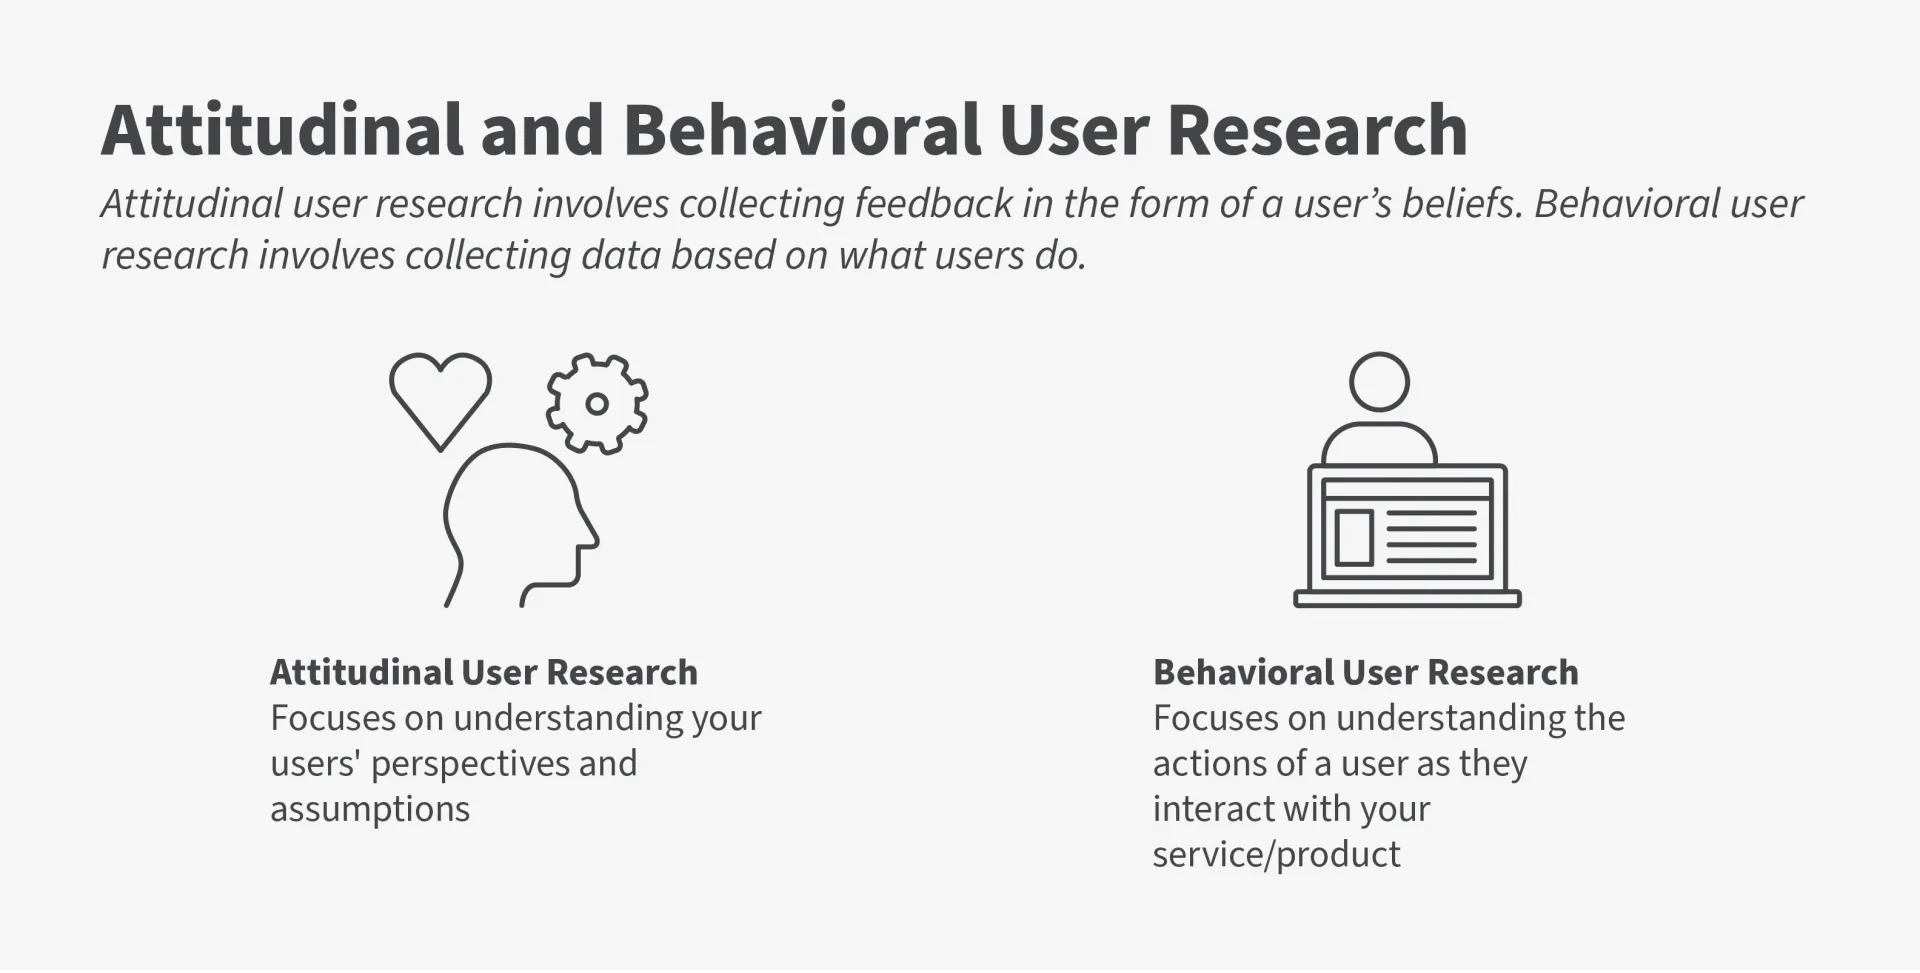 Infographic with two icons showing the difference between attitudinal and behavioral user research.